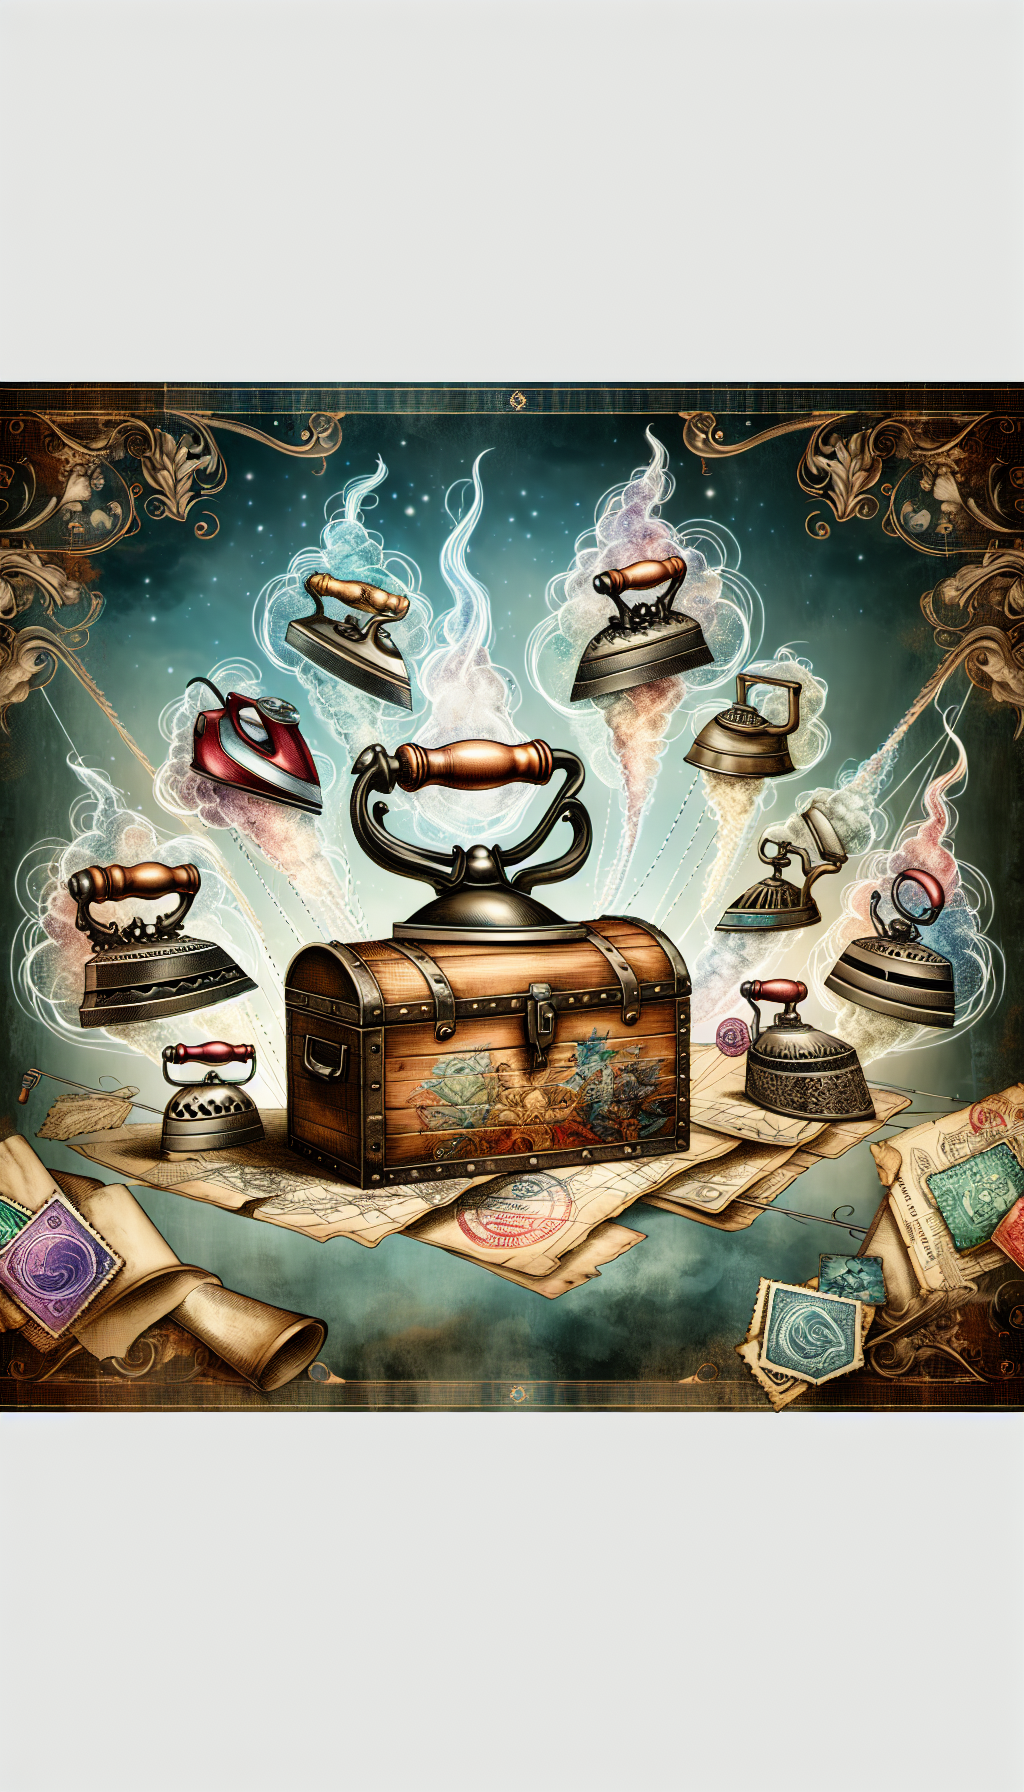 A whimsical Victorian-style drawing tableaux displays a collection of antique irons levitating above a treasure chest overflowing with diverse elements like a steam plume, rare stamps, intricate decals, and a historical map, symbolizing the unique features that enhance their value. The ethereal glow and ornate embellishments within the image suggest the hidden magic and worth of these collectible items.